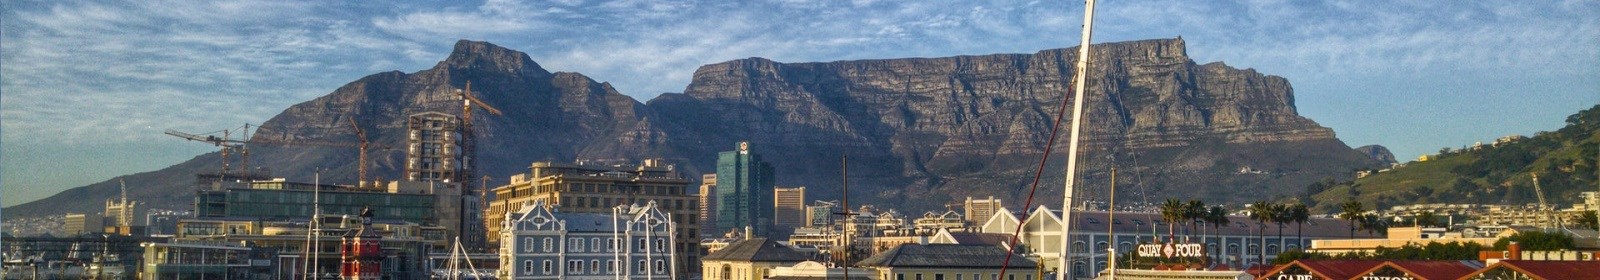 Foreign property buyers eye SA to escape their lockdown blues